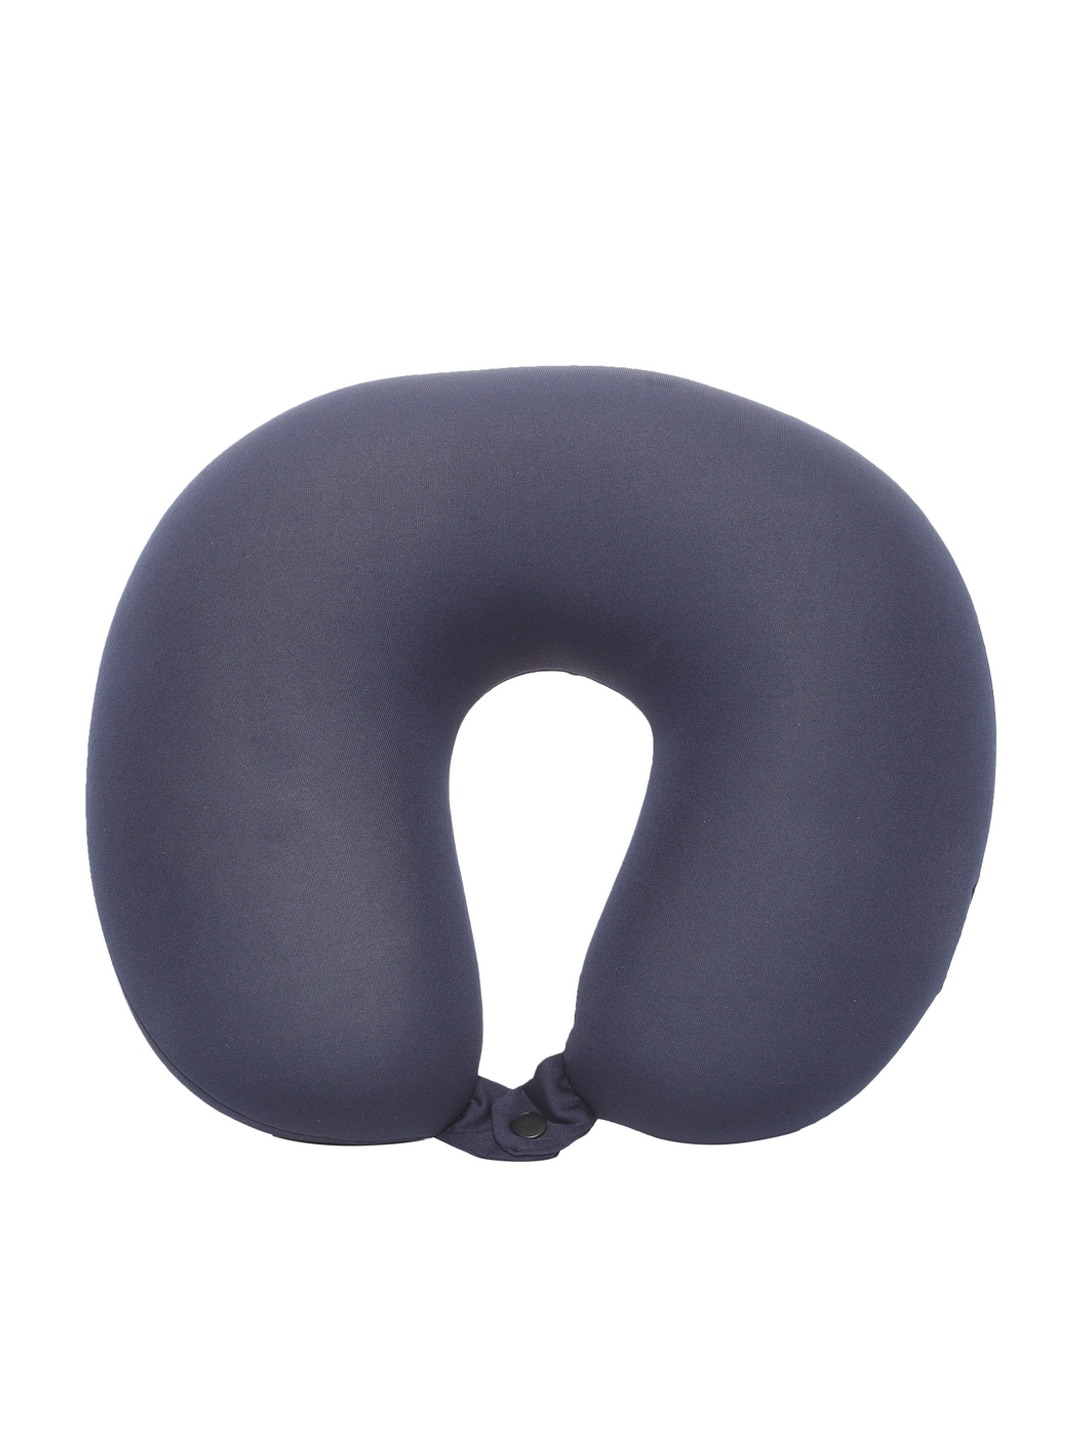 Teakwood Leathers Unisex Blue Solid Memory Foam Travel Neck Pillow Price in India